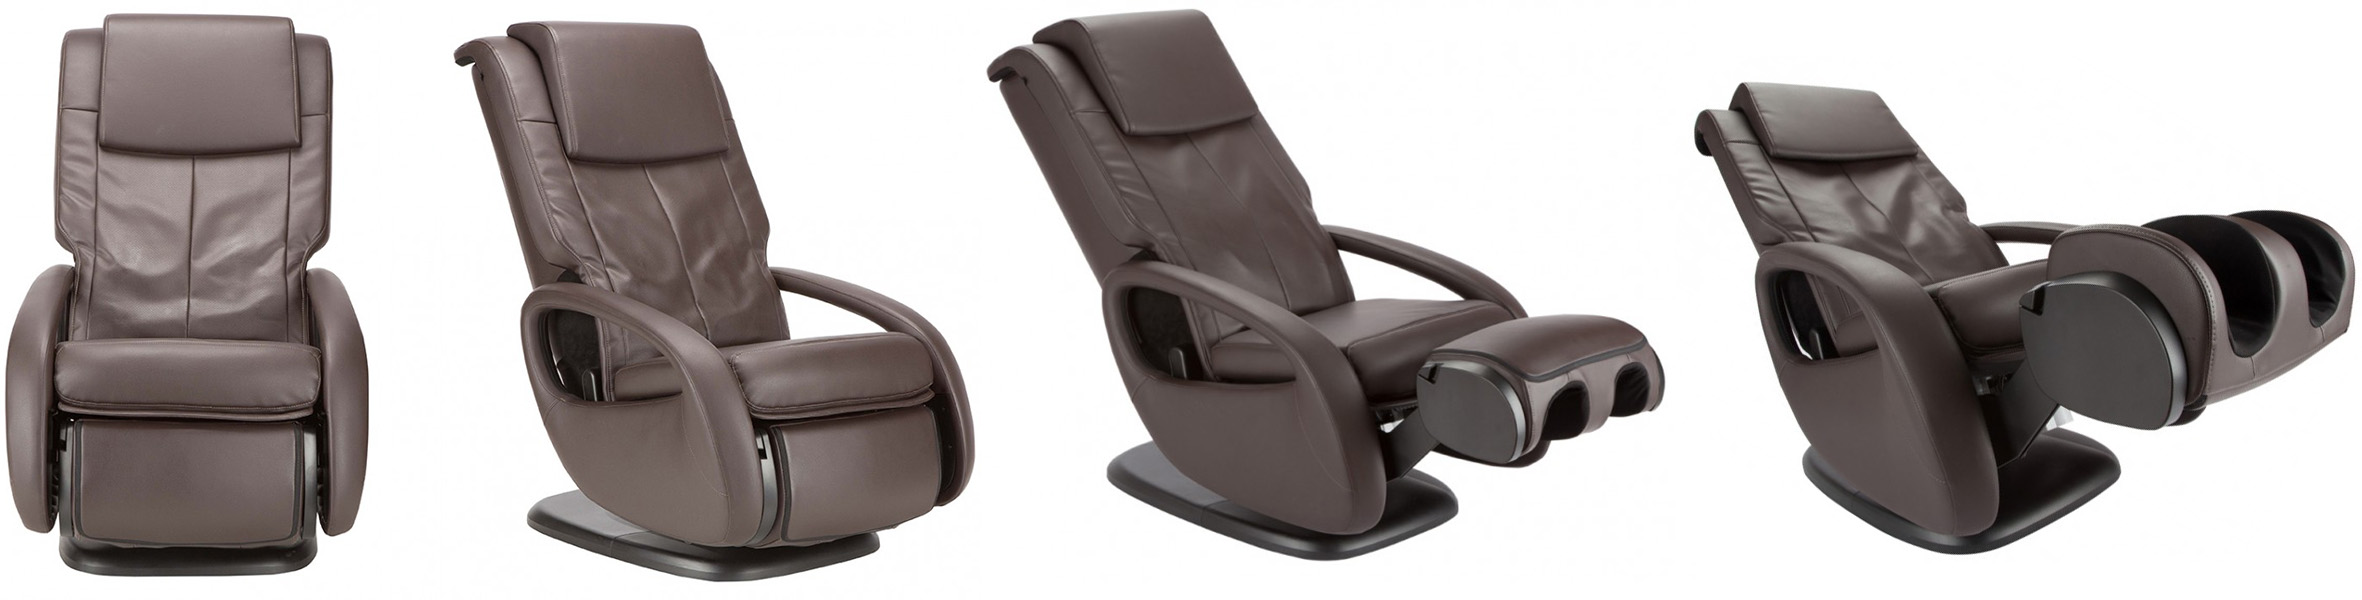 Wholebody 7 1 Massage Chair Recliner By Human Touch